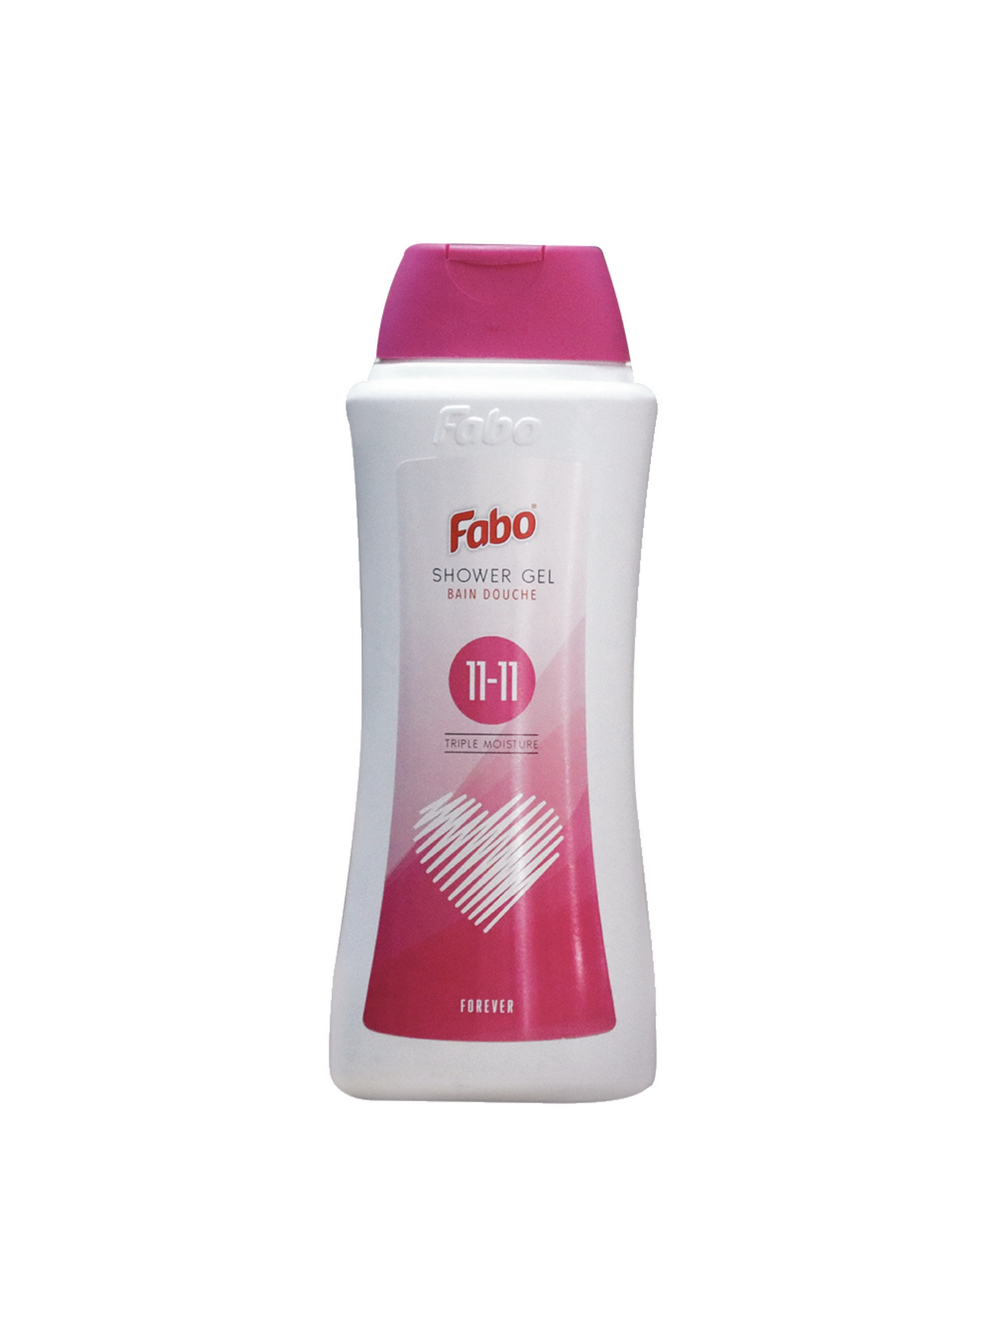 fabo-products_page-0115